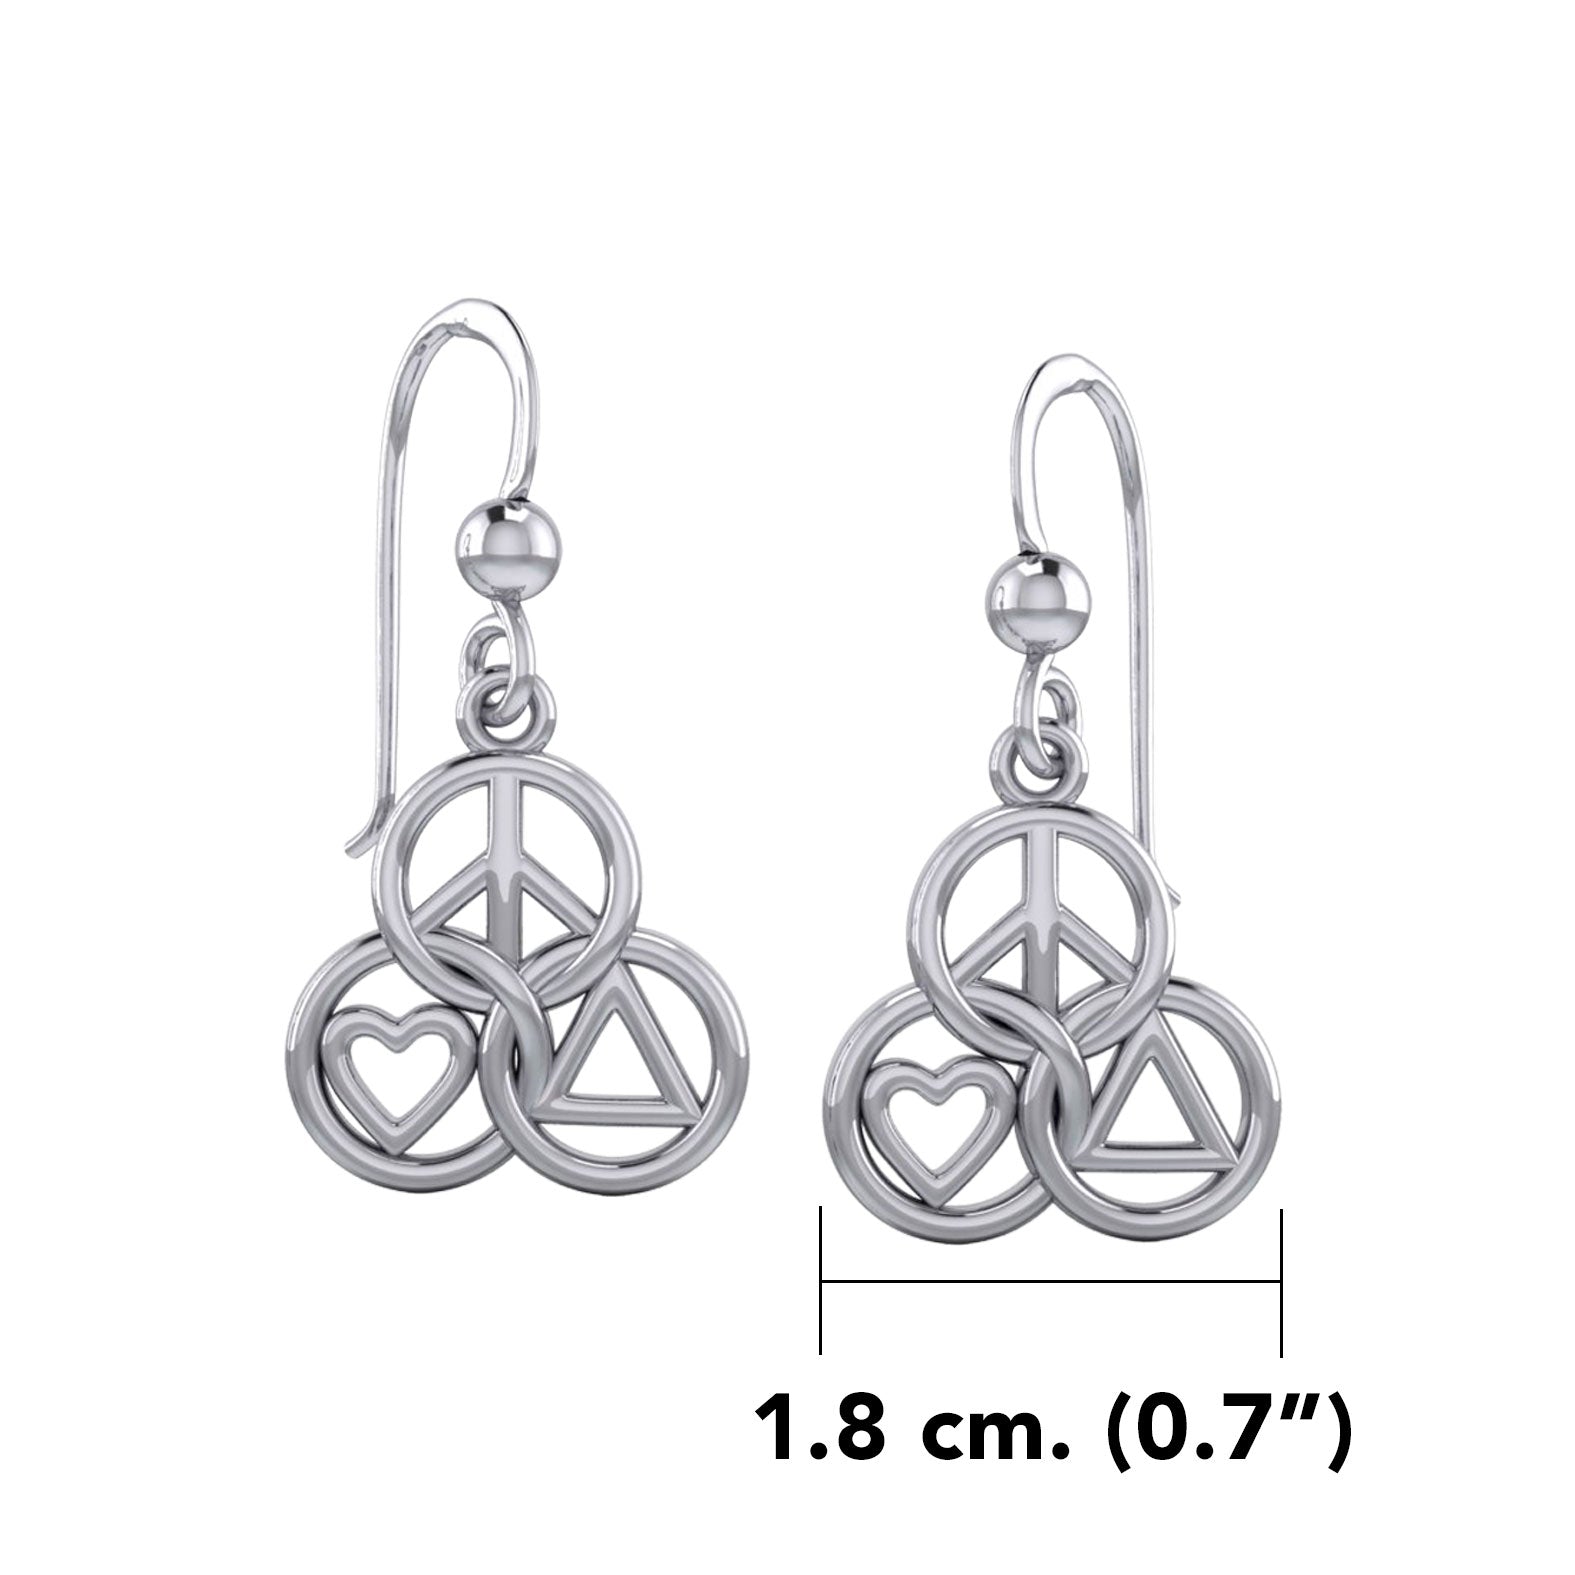 Peace, Love and Recovery in Borromean rings Silver Earrings TER2169